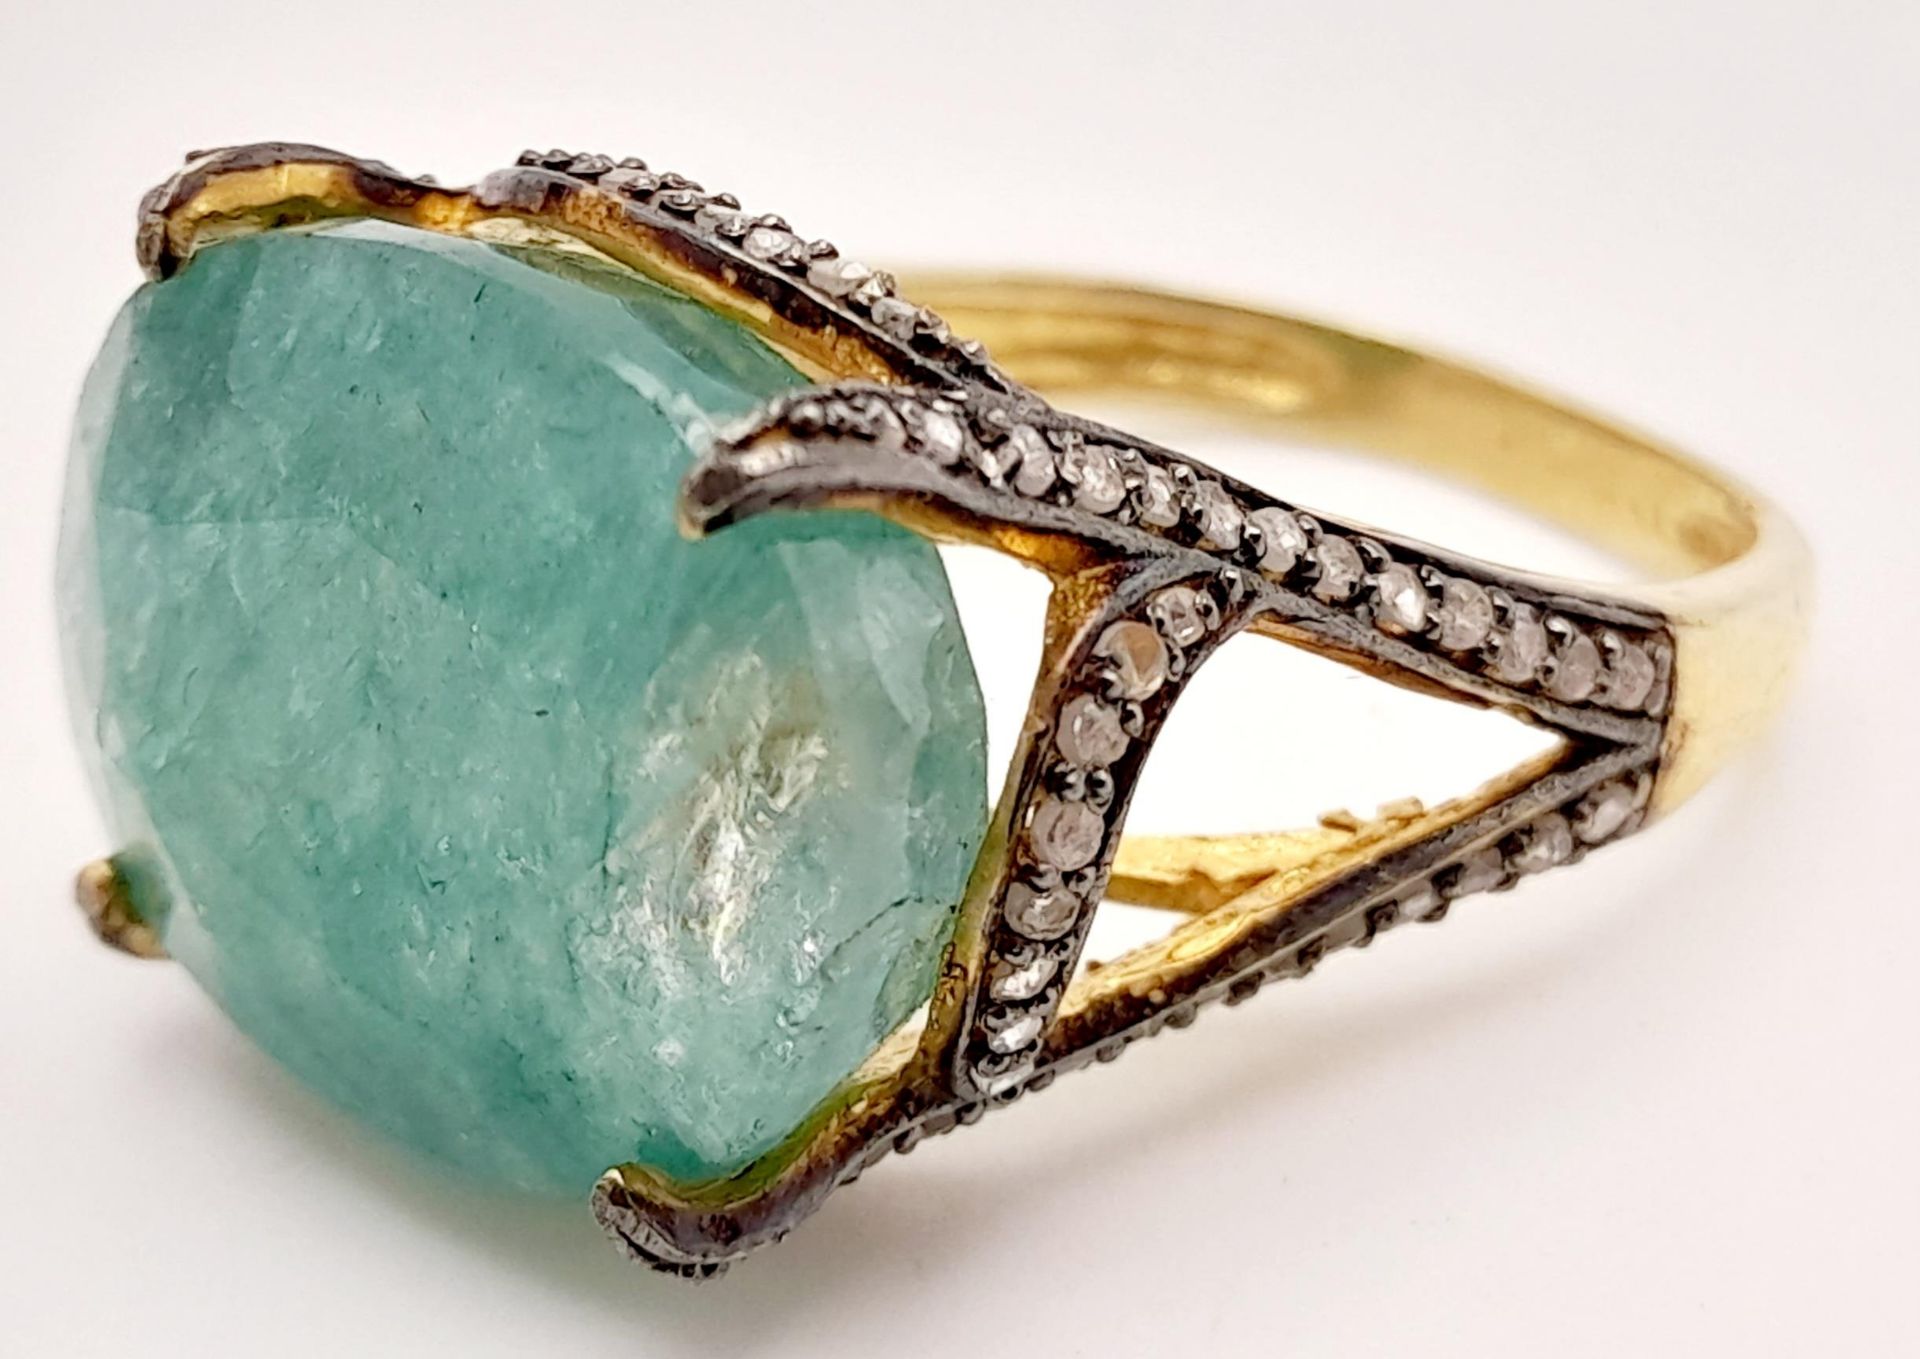 An Emerald Ring with Rose cut Diamond Accents. Set in gold plated 925 silver. Emerald - 17ct. - Image 4 of 7